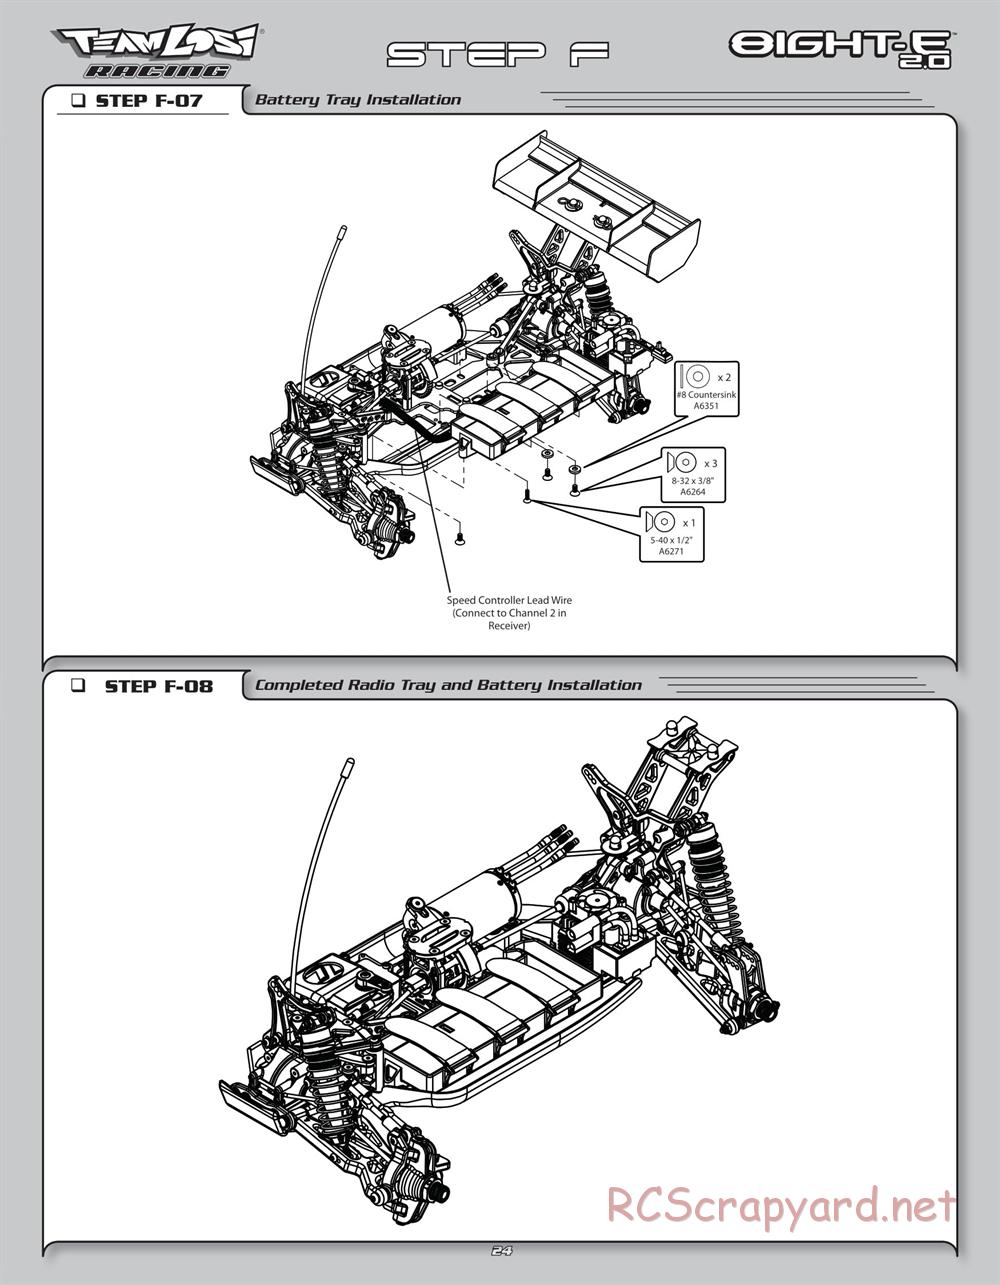 Team Losi - 8ight-E 2.0 Race Roller - Manual - Page 27